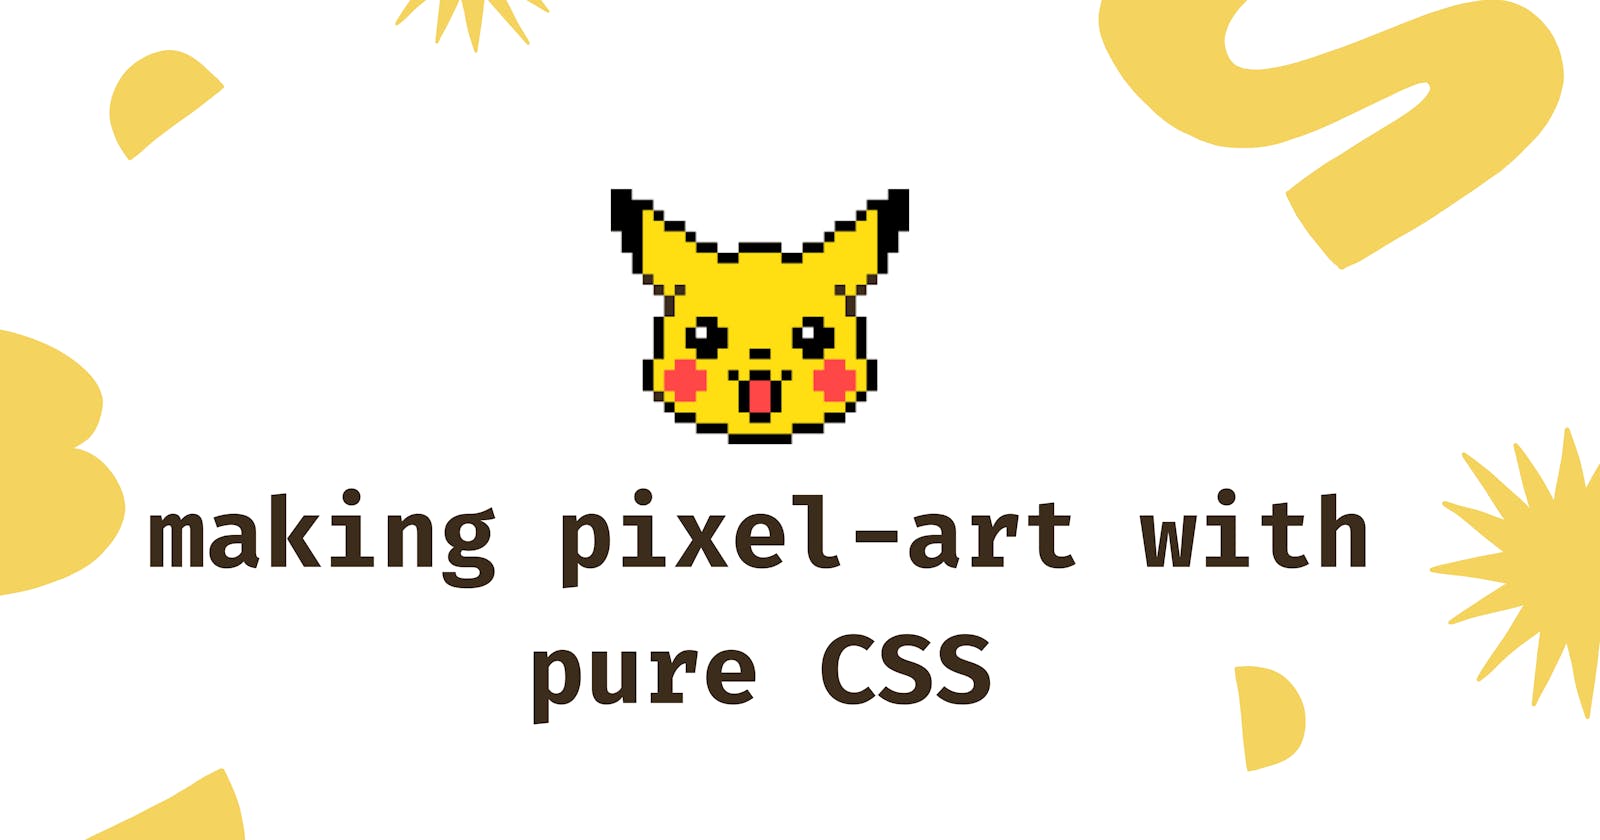 Making pixel-art with pure CSS